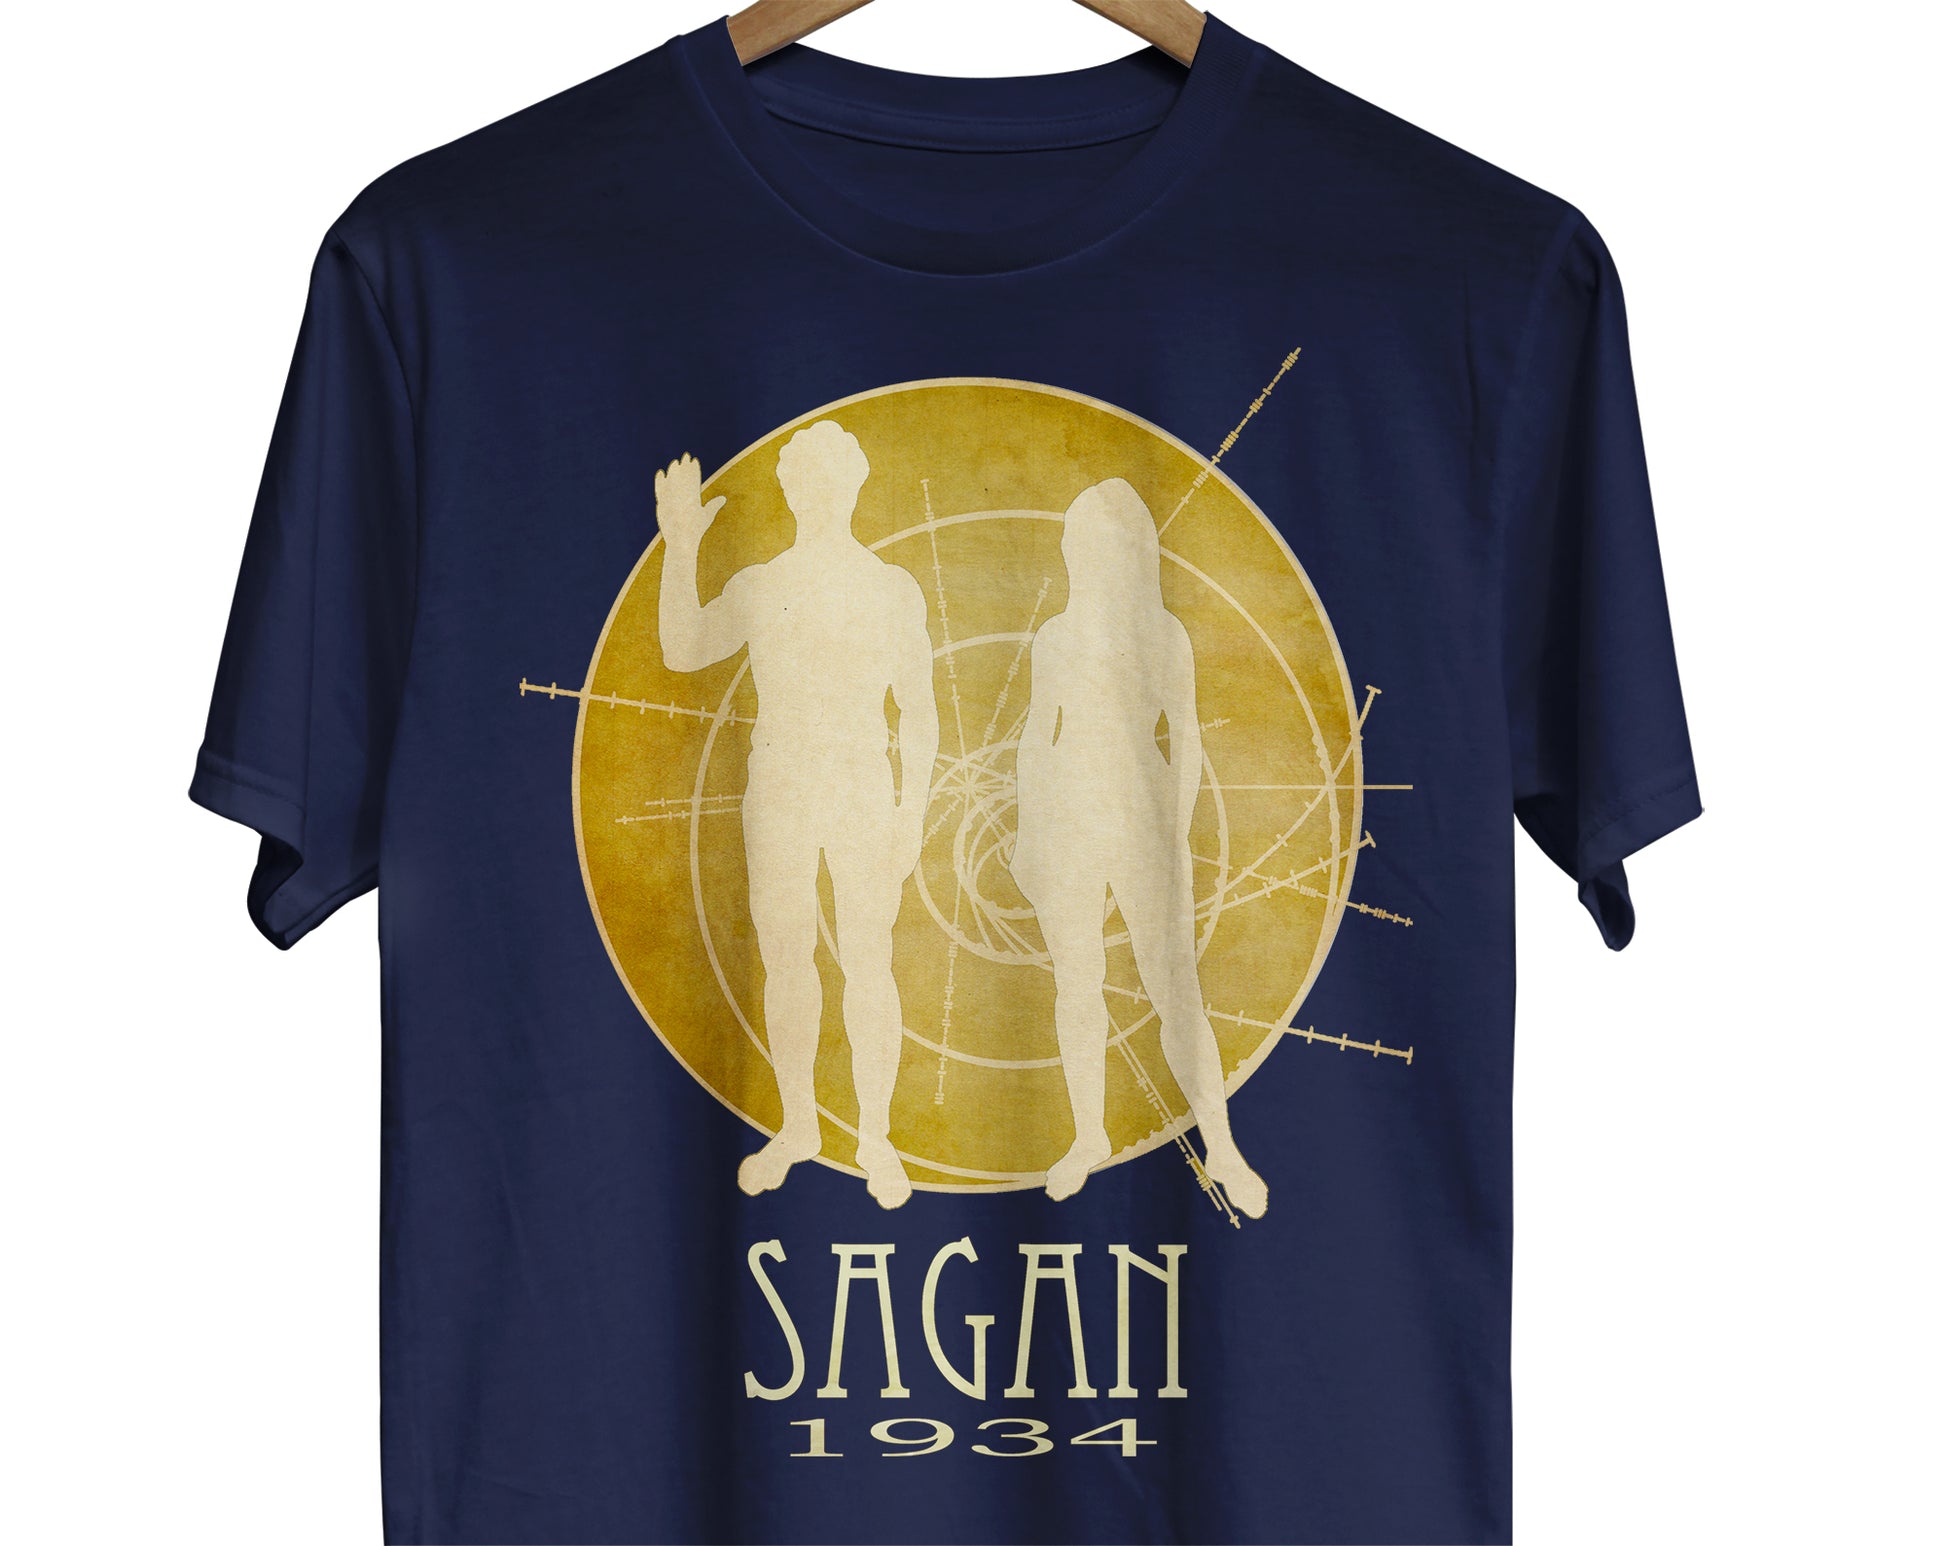 Carl Sagan astronomy t-shirt with a design representing the golden plaques on the Pioneer 10 and 11 journeys 